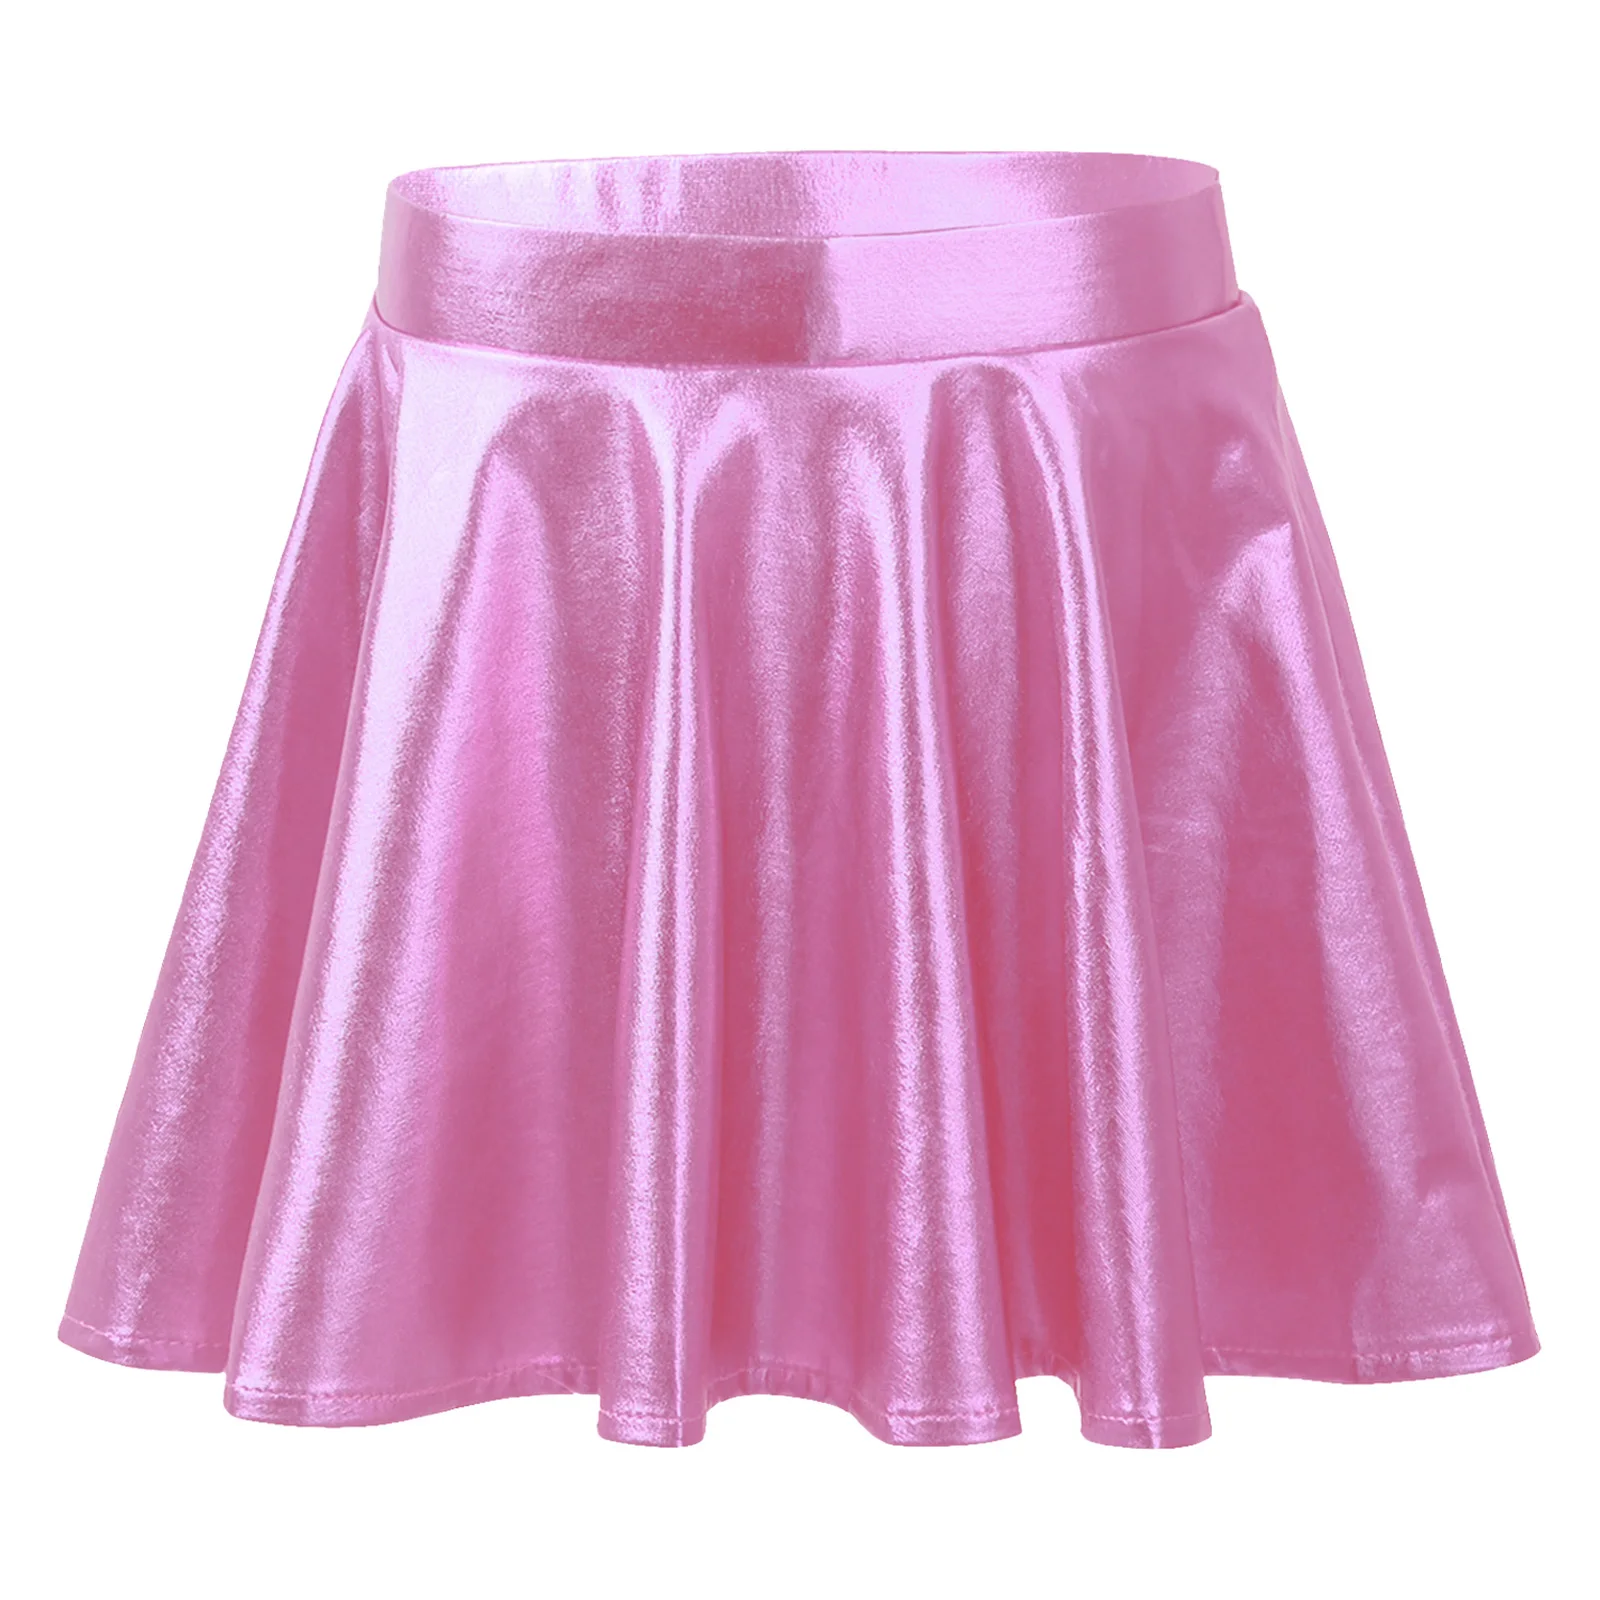 Kids Girls Glossy Metallic Flared Pleated A-Line Miniskirt Soft Dance Athletic Shiny Scooter Skirt with High Elastic Waistband